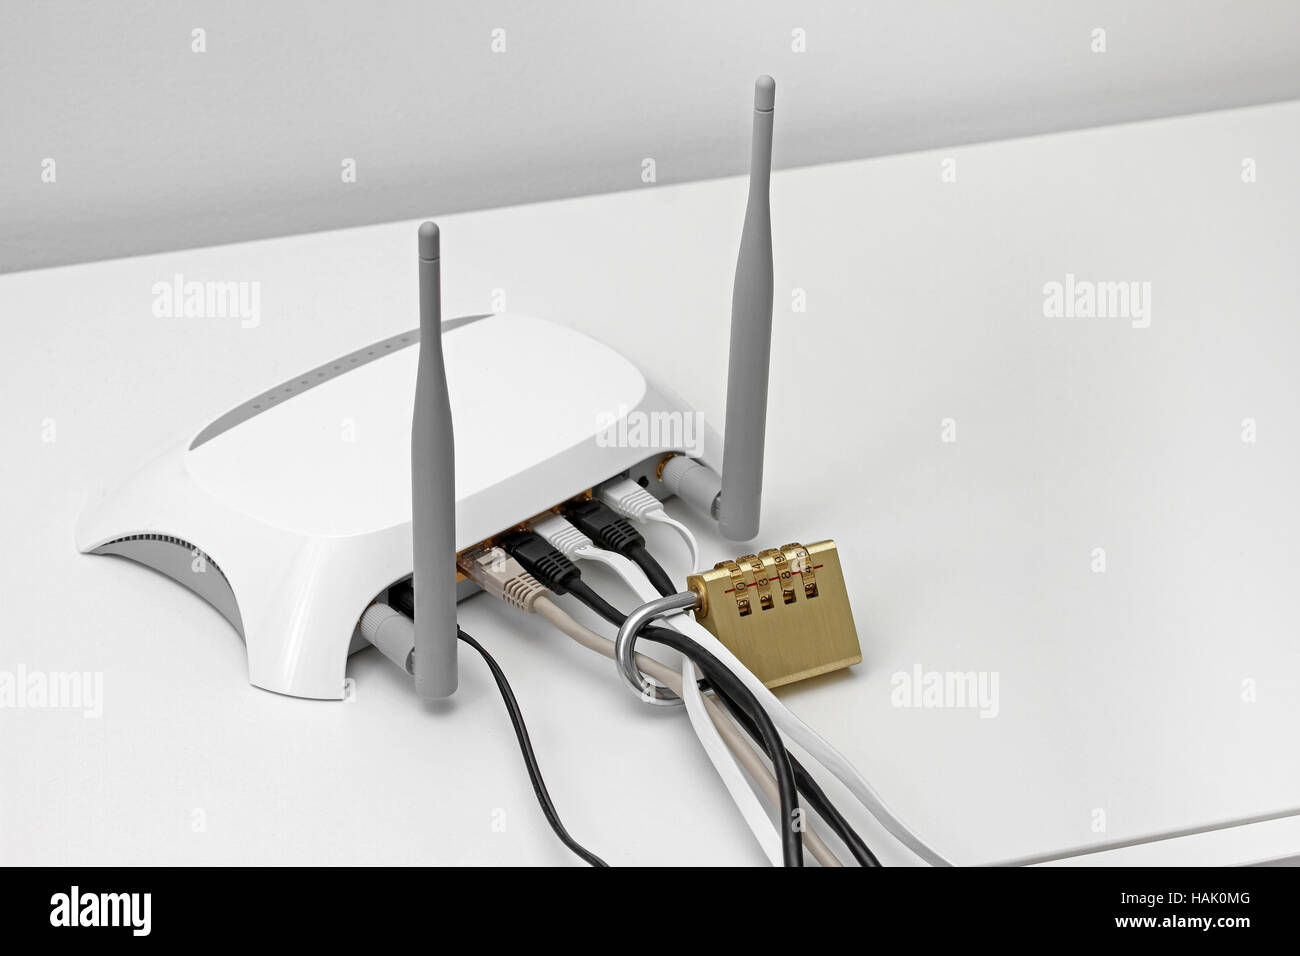 blocked internet access concept - wifi router with padlock Stock Photo